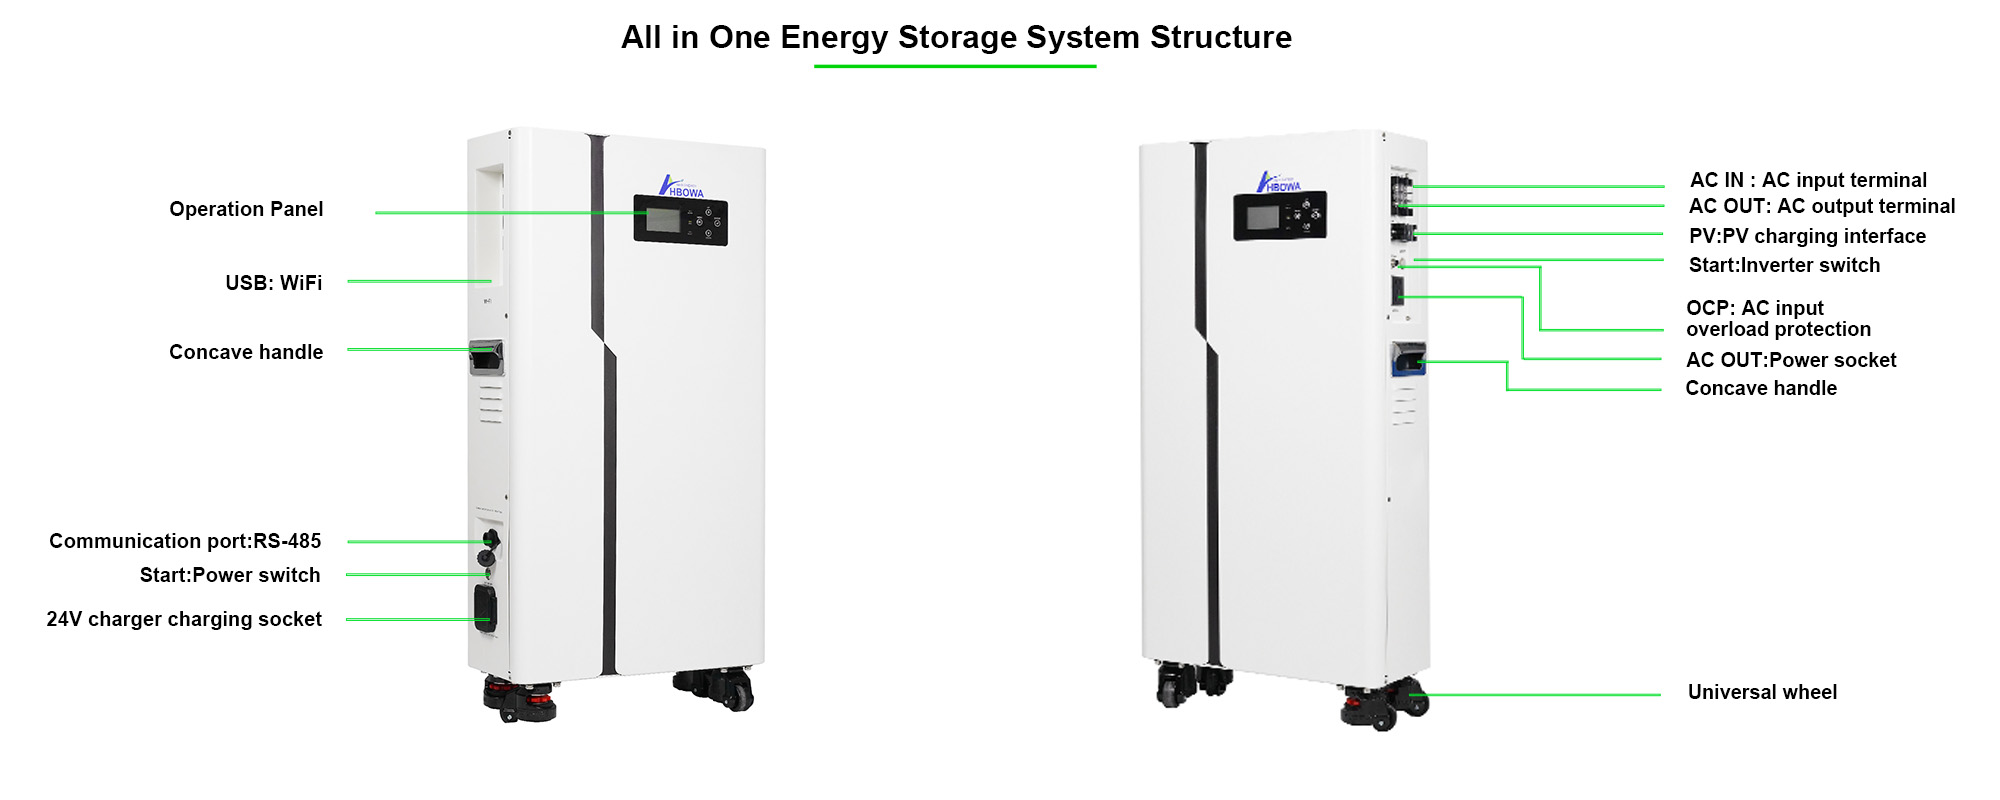 all-in-one energy storage system structure - HBOWA NEW Energy